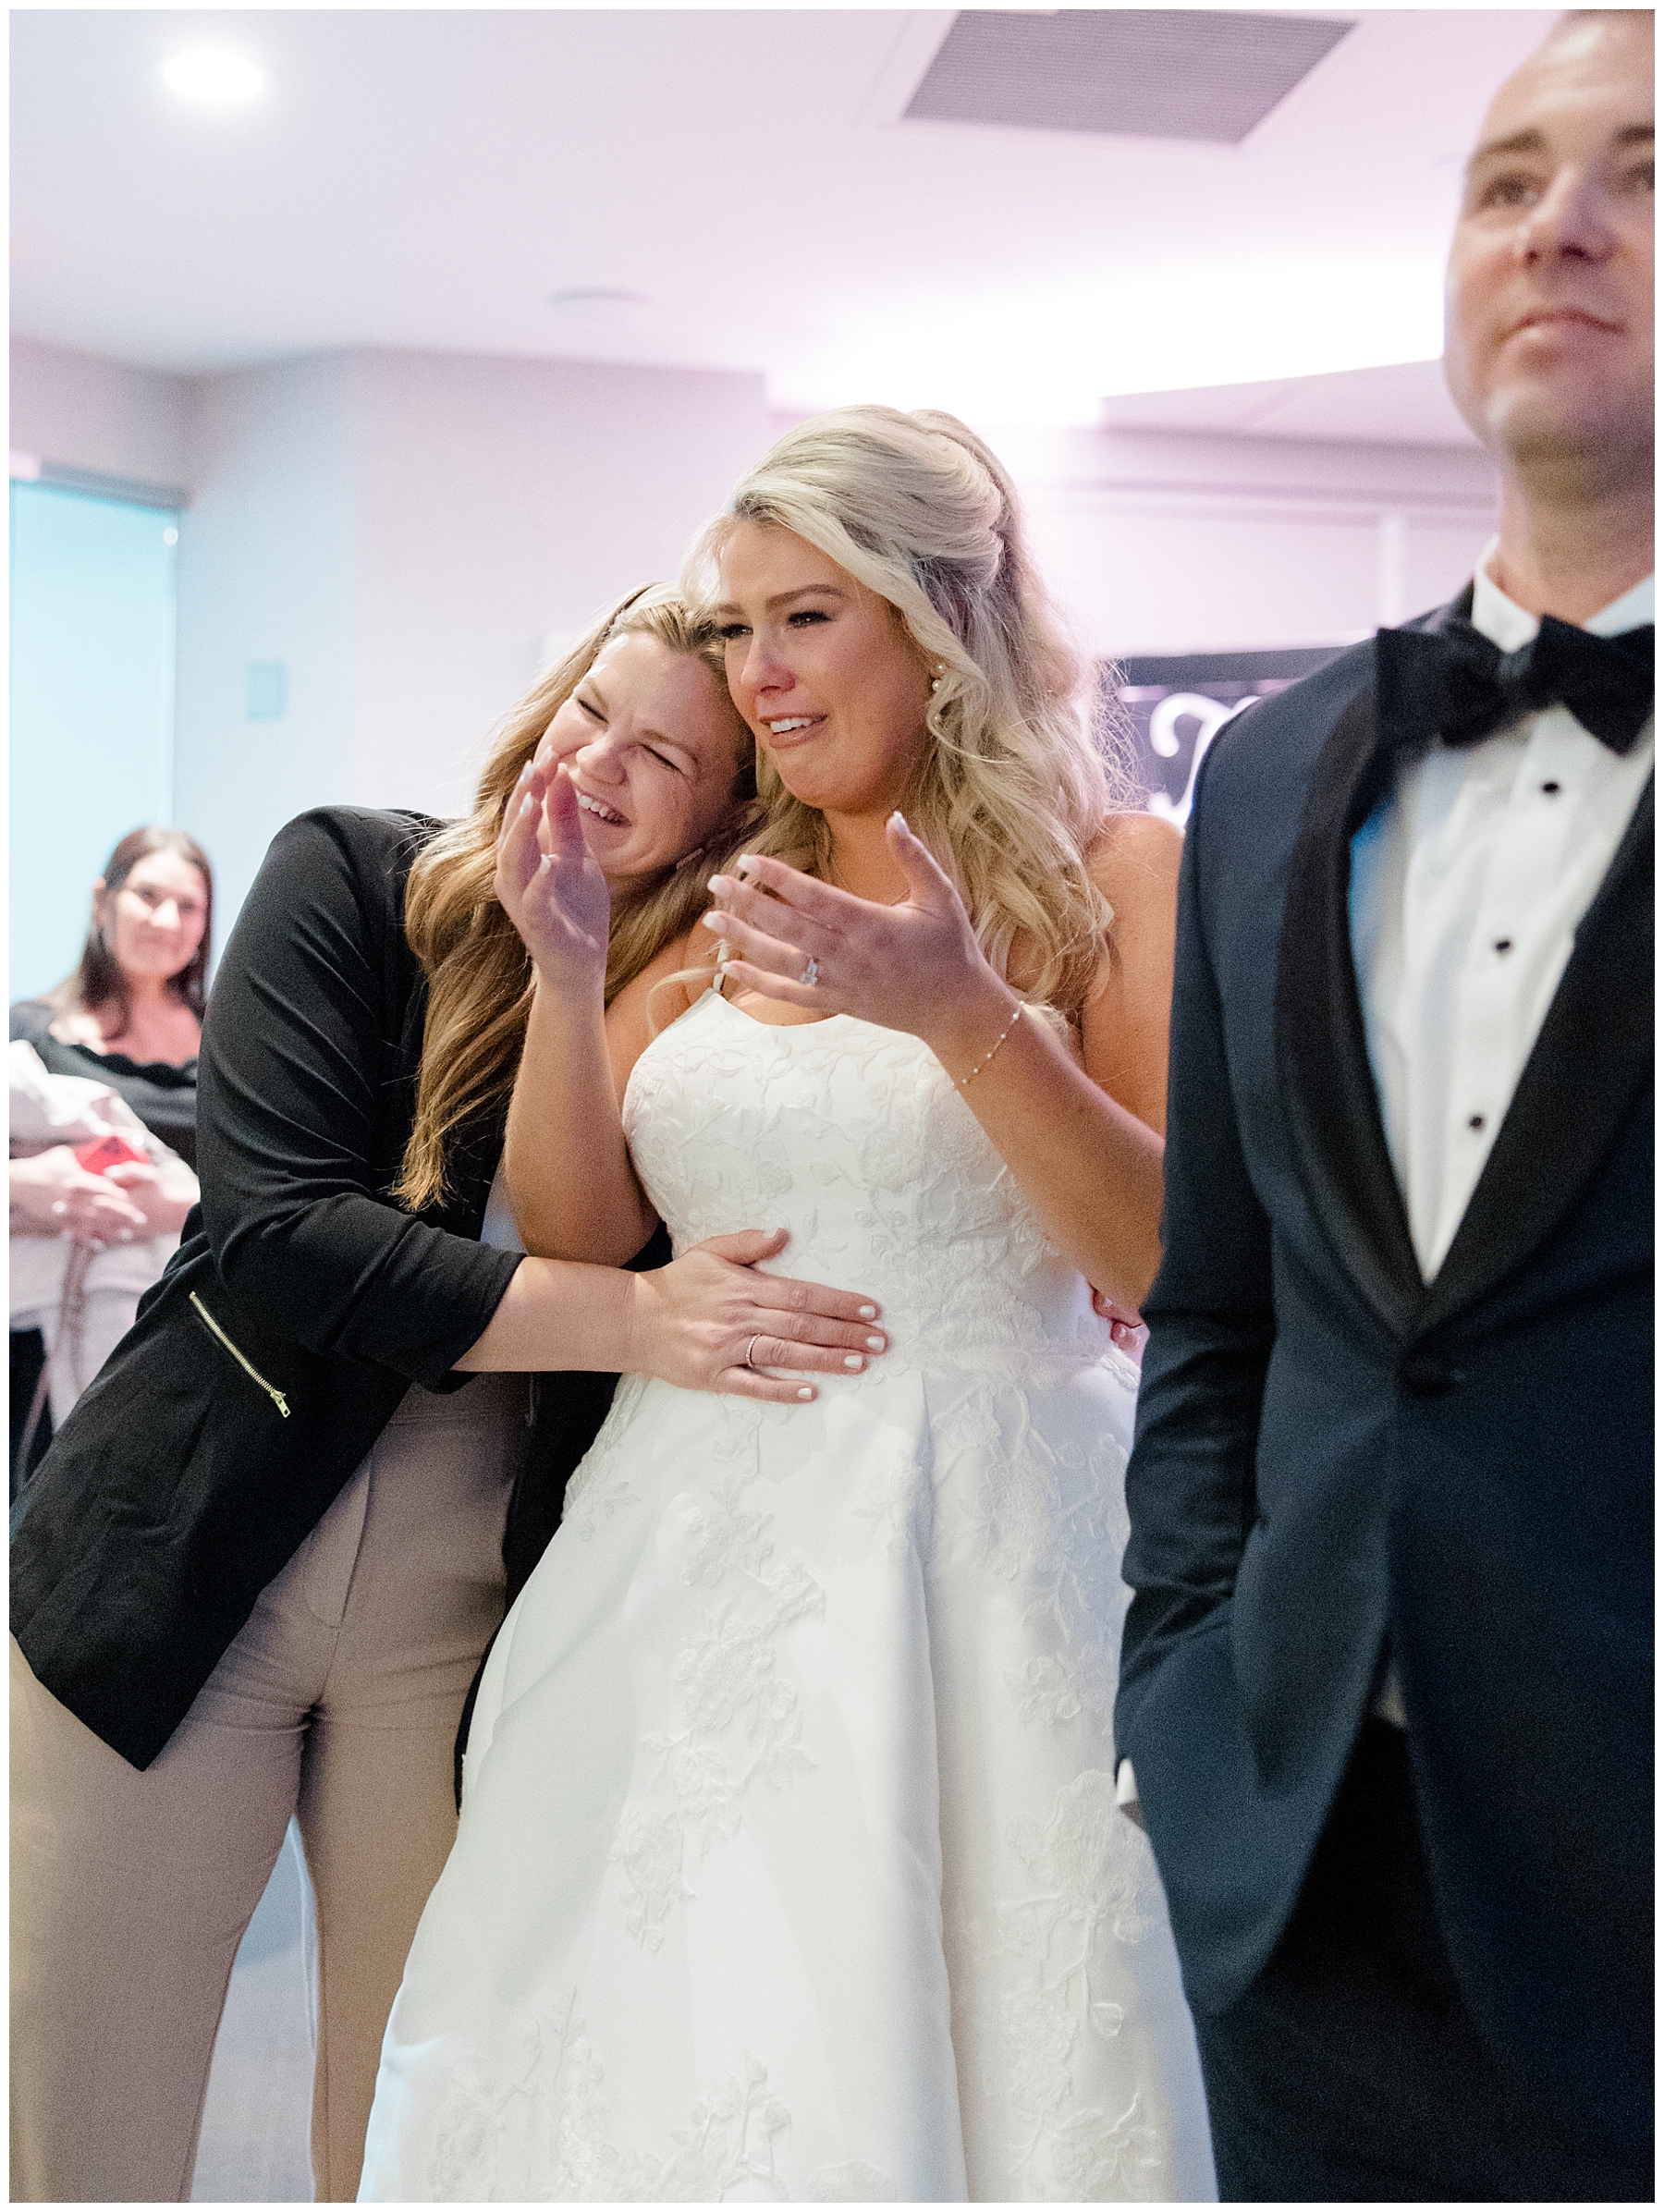 bride reacts to seeing wedding reception details and decor